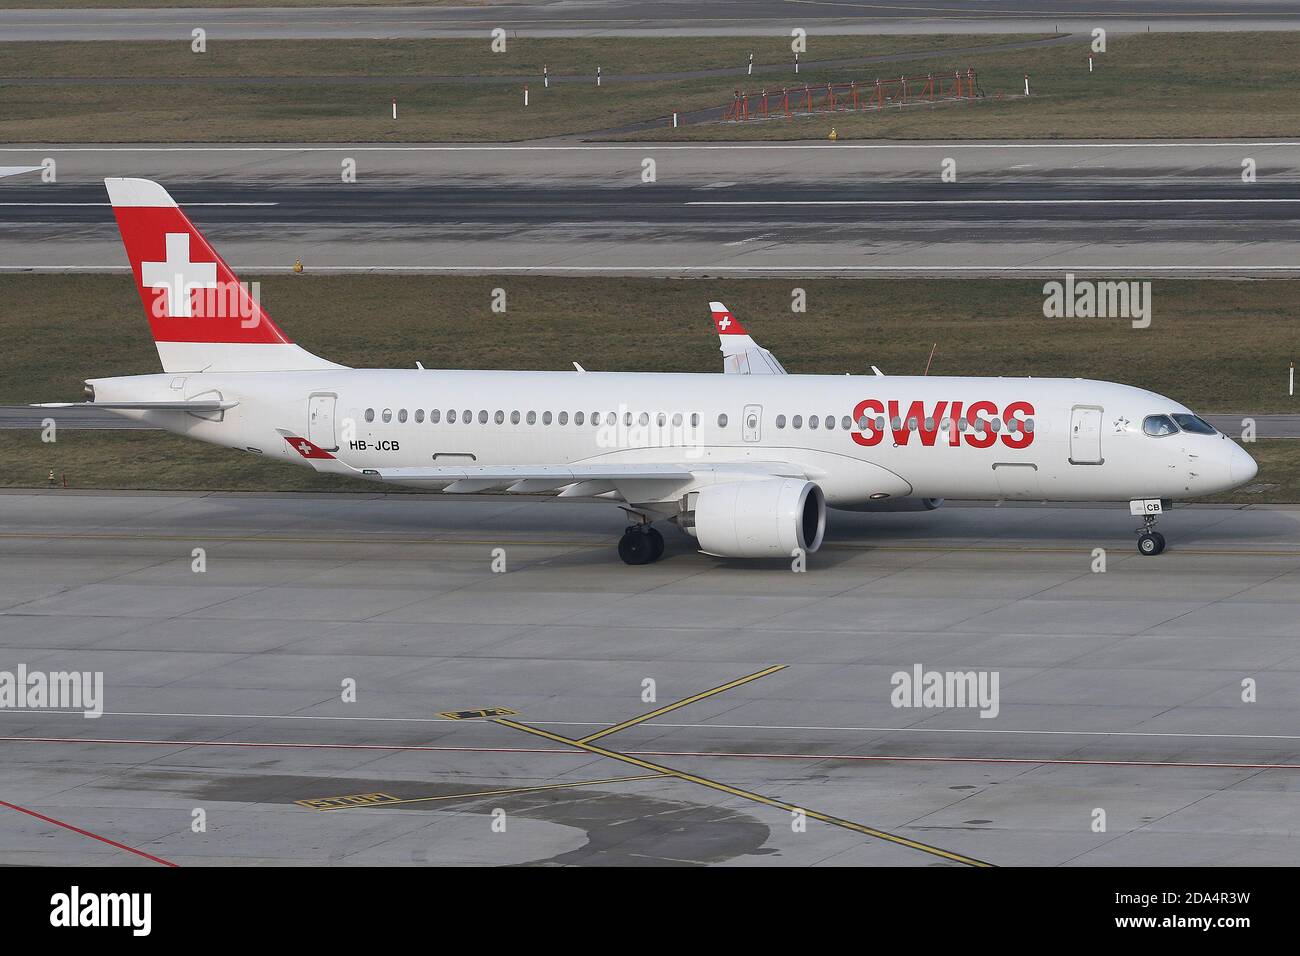 A Swiss Airlines Airbus A220 at Zurich Kloten Airport, Switzerland on 23 January 2019. (Credit: Robert Smith | MI News) Stock Photo